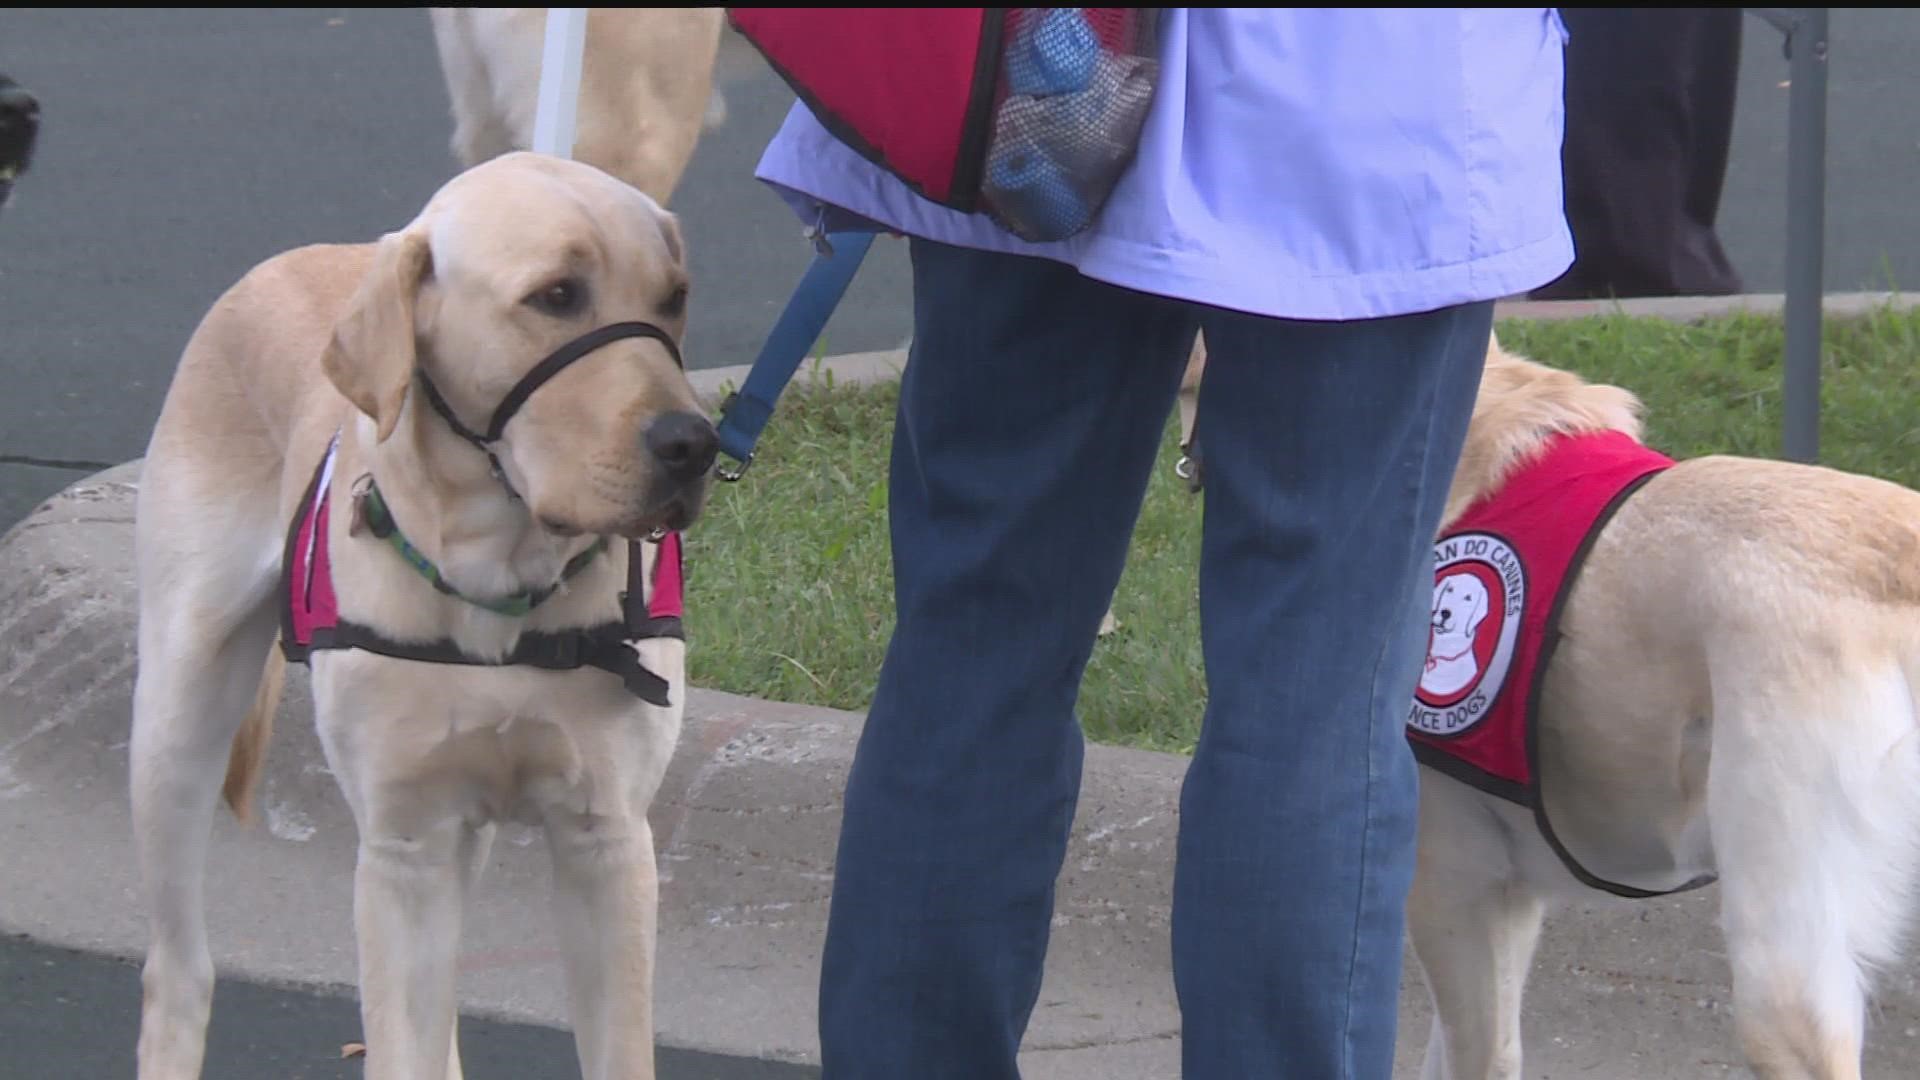 do service dogs have to walk